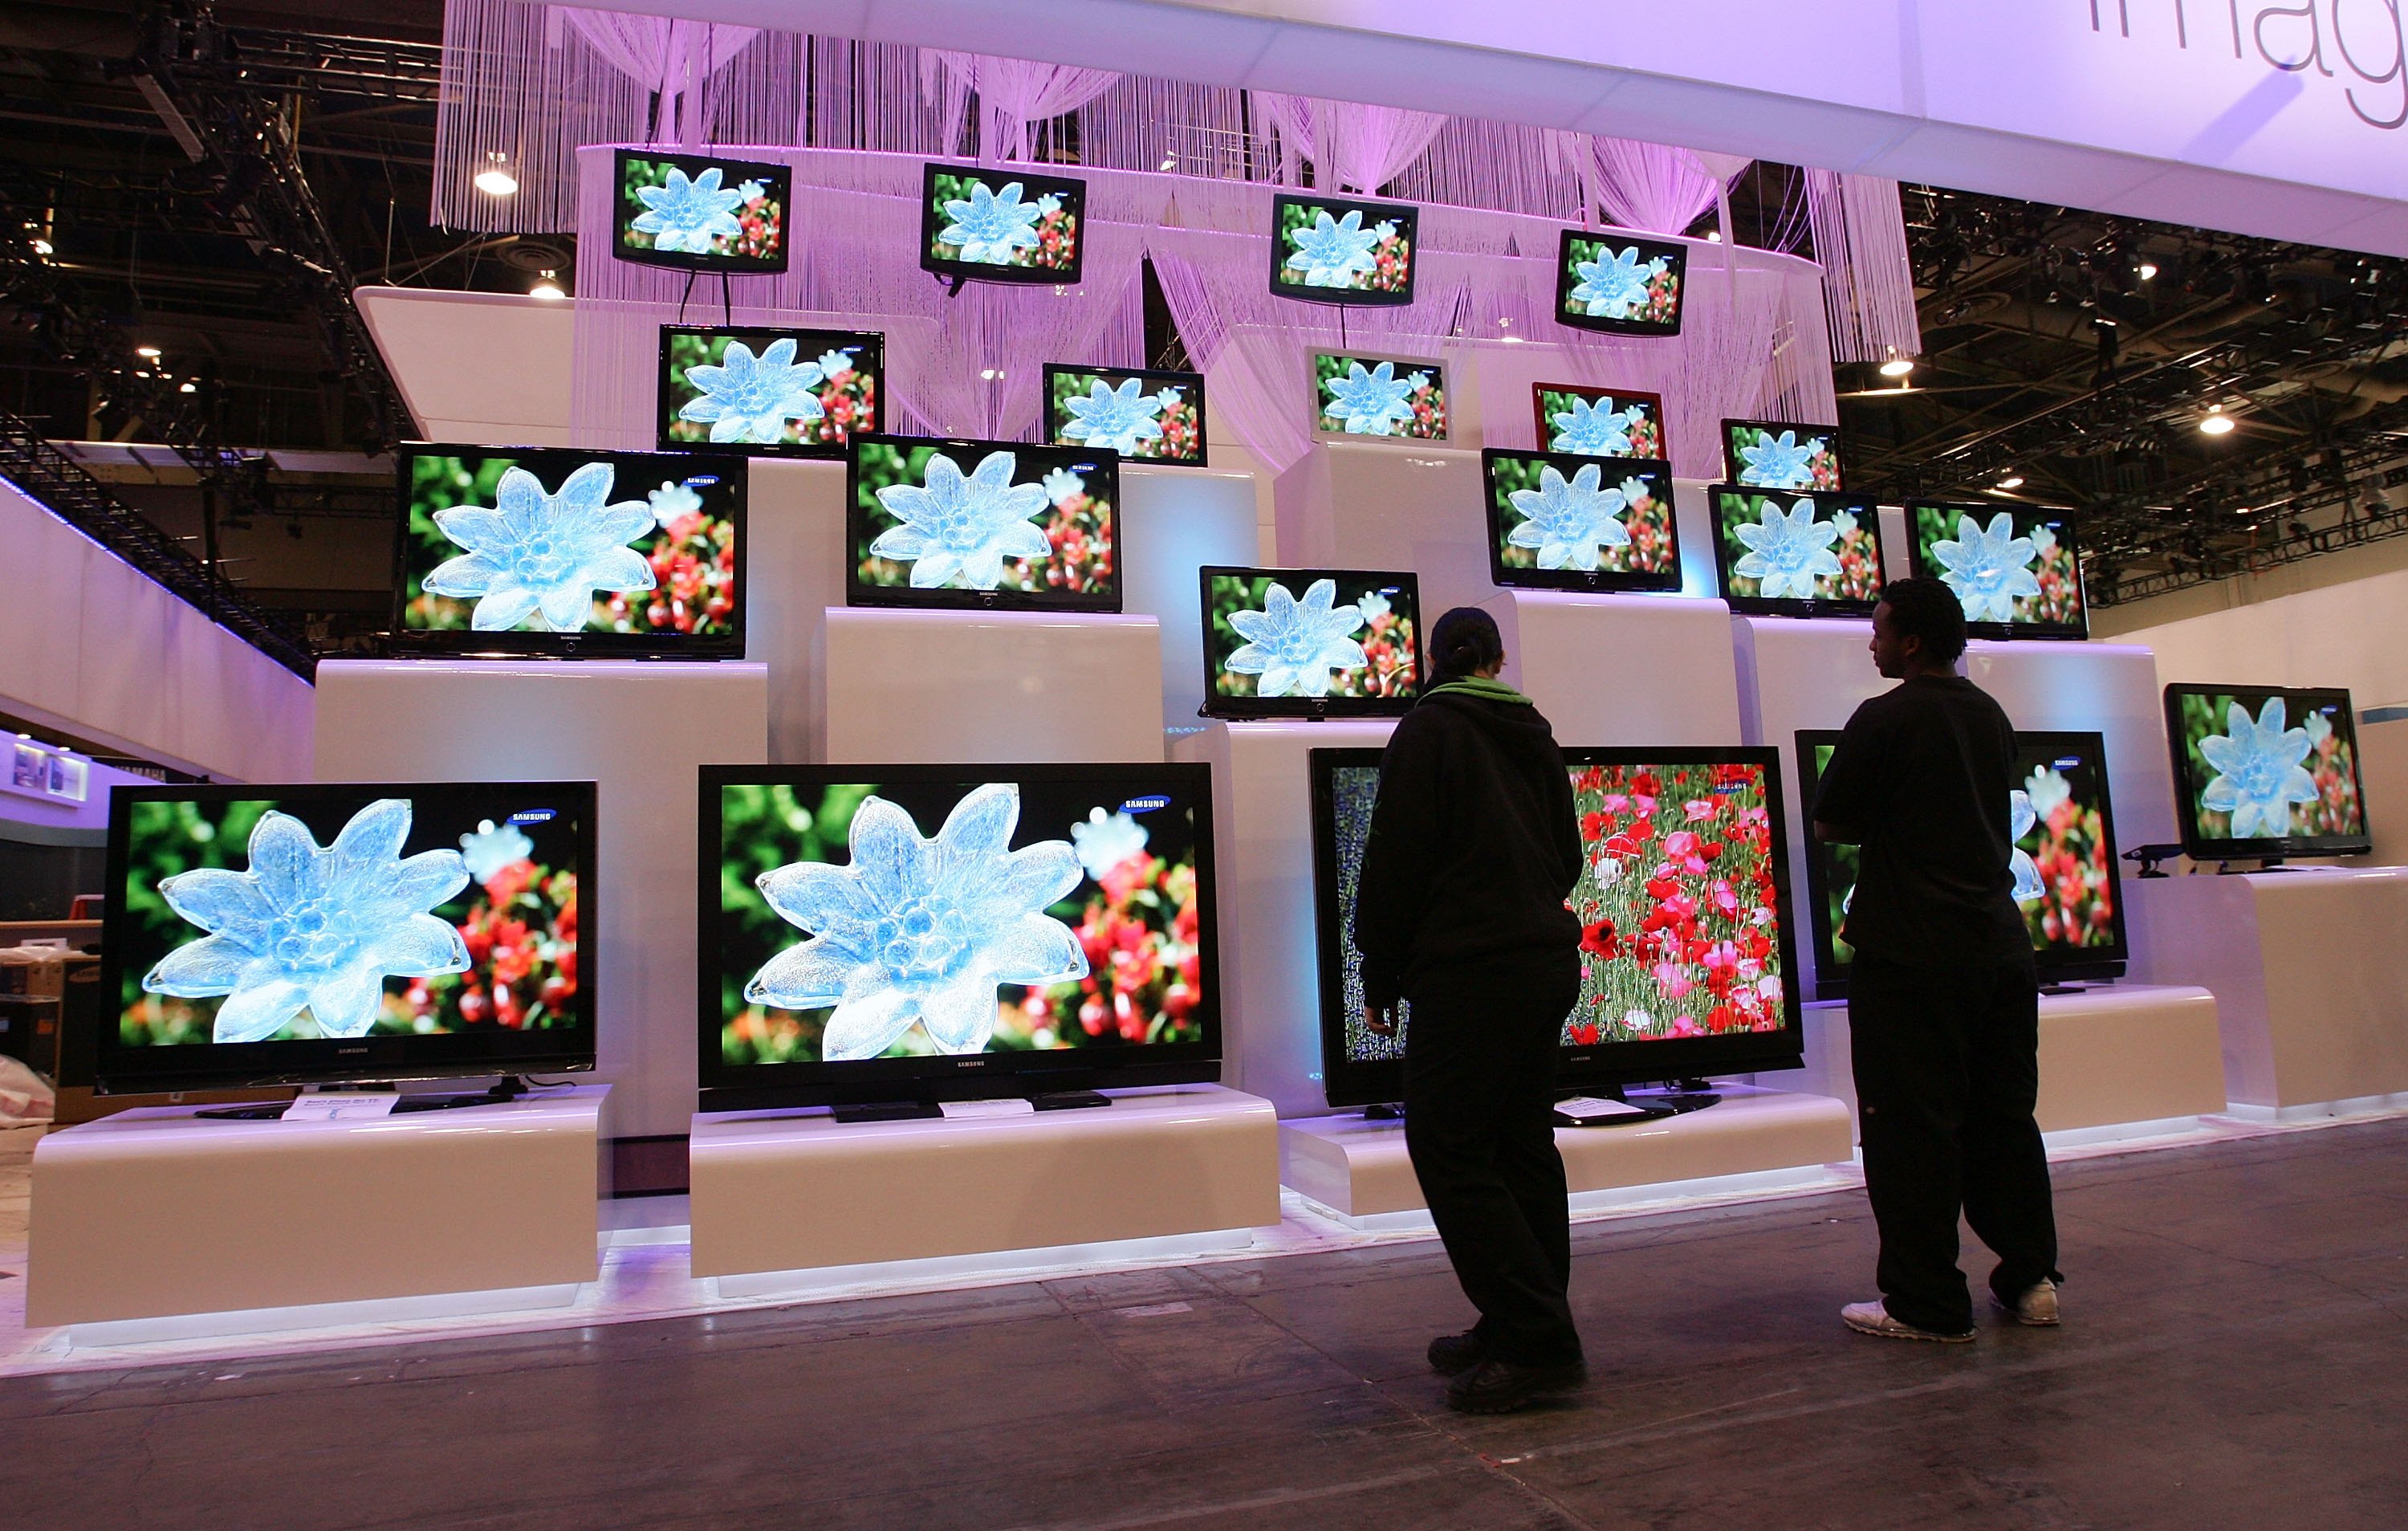 Workers look at a display of televisions by Samsung at the Las Vegas Convention Center as preparations continue for the opening of the 2007 International Consumer Electronics Show January 5, 2007 in Las Vegas, Nevada. (Ethan Miller—Getty Images)